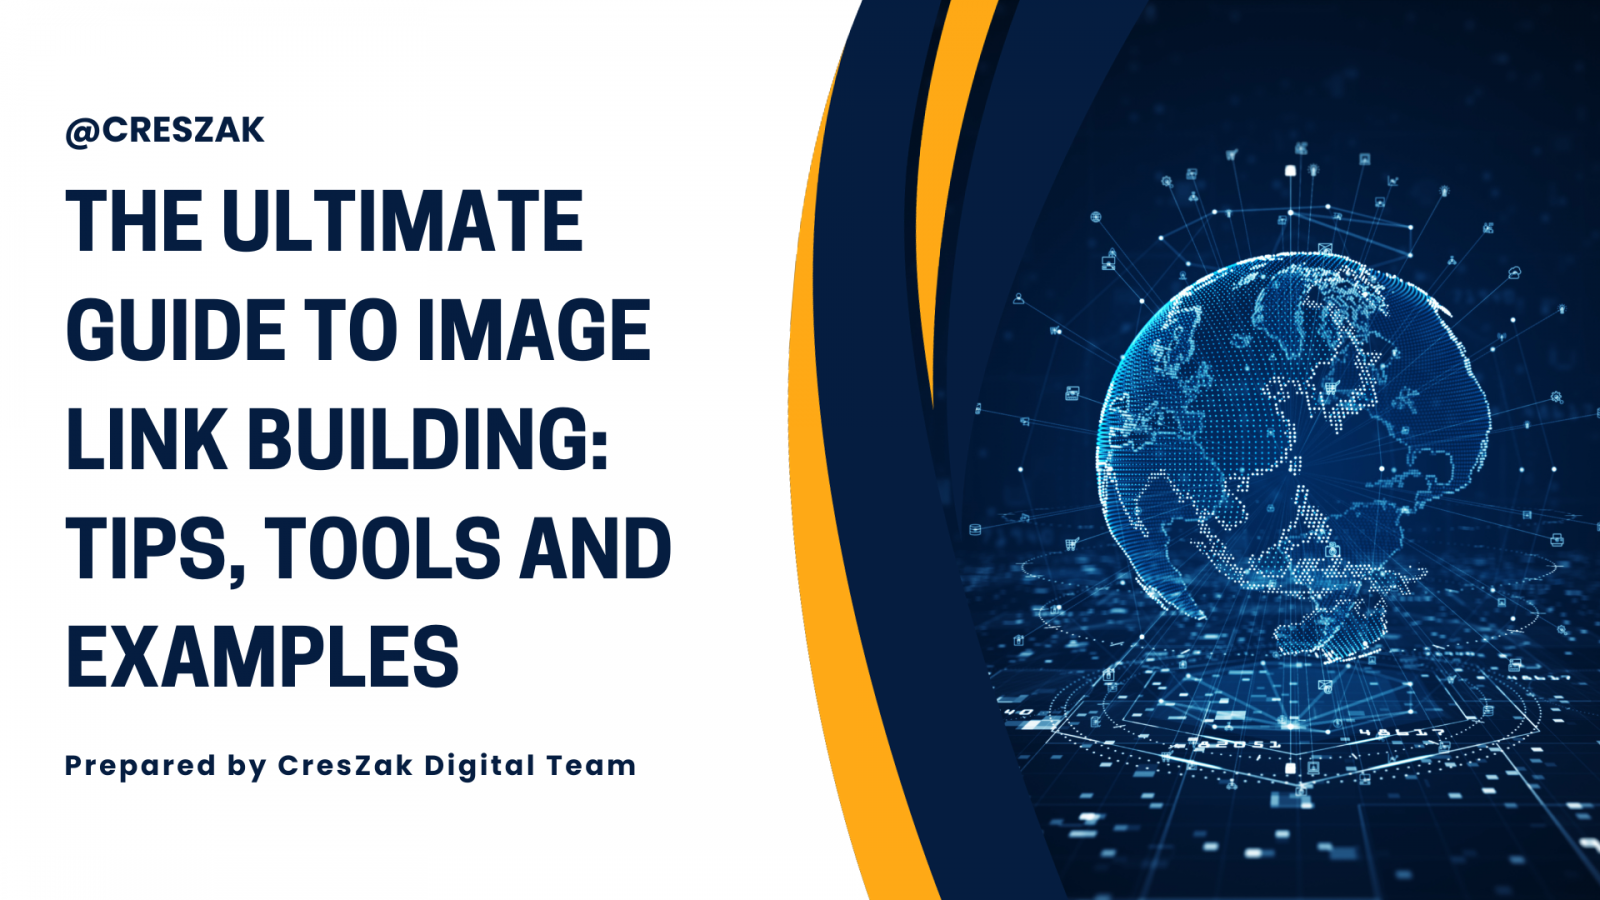 The Ultimate Guide to Image Link Building: Tips, Tools and Examples